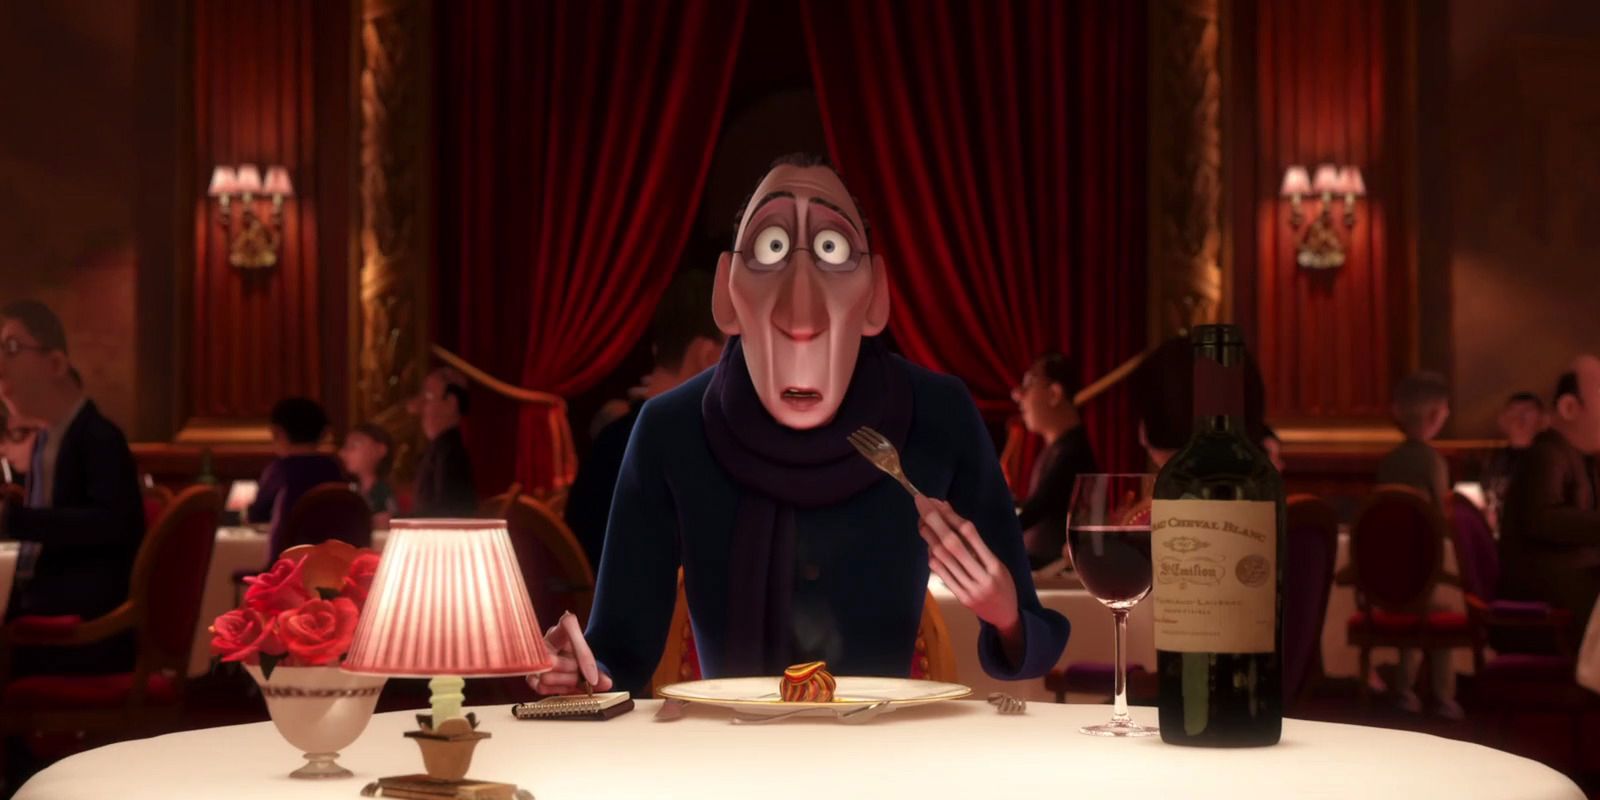 Anton Ego eats the ratatouille and remembers his childhood